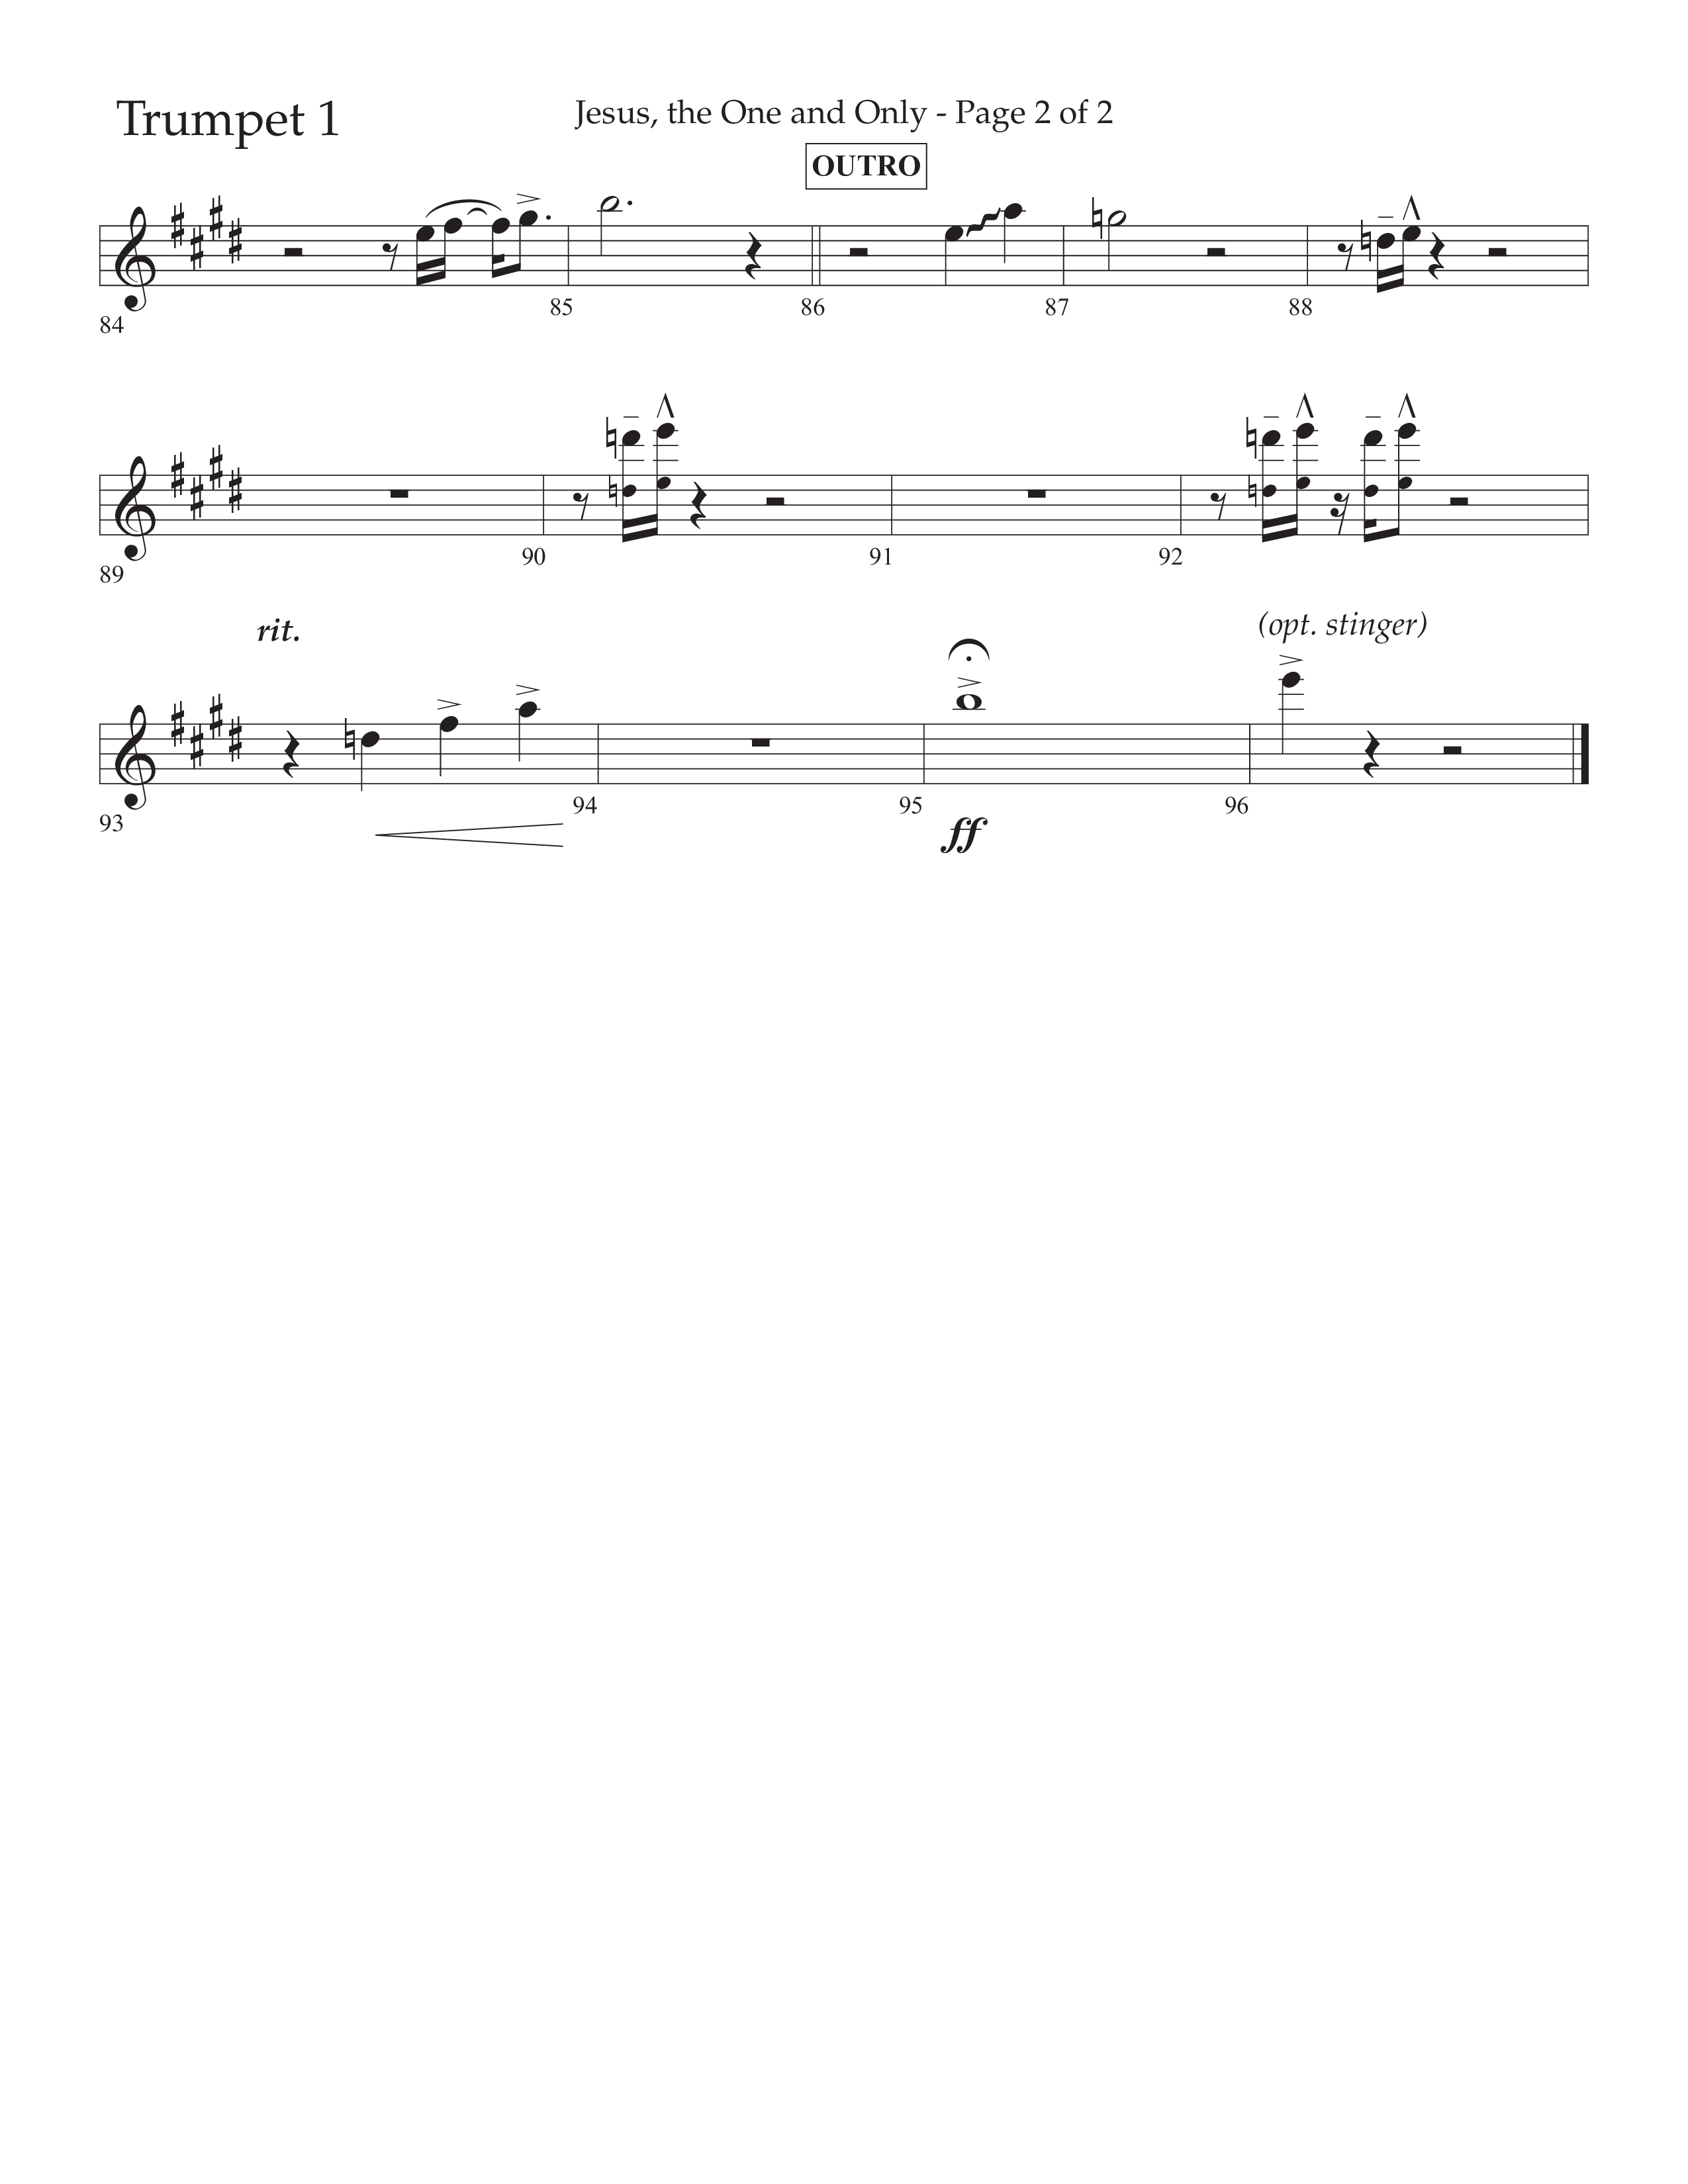 Jesus The One And Only (Choral Anthem SATB) Trumpet 1 (Lifeway Choral / Arr. John Bolin / Arr. Don Koch / Orch. David Shipps)